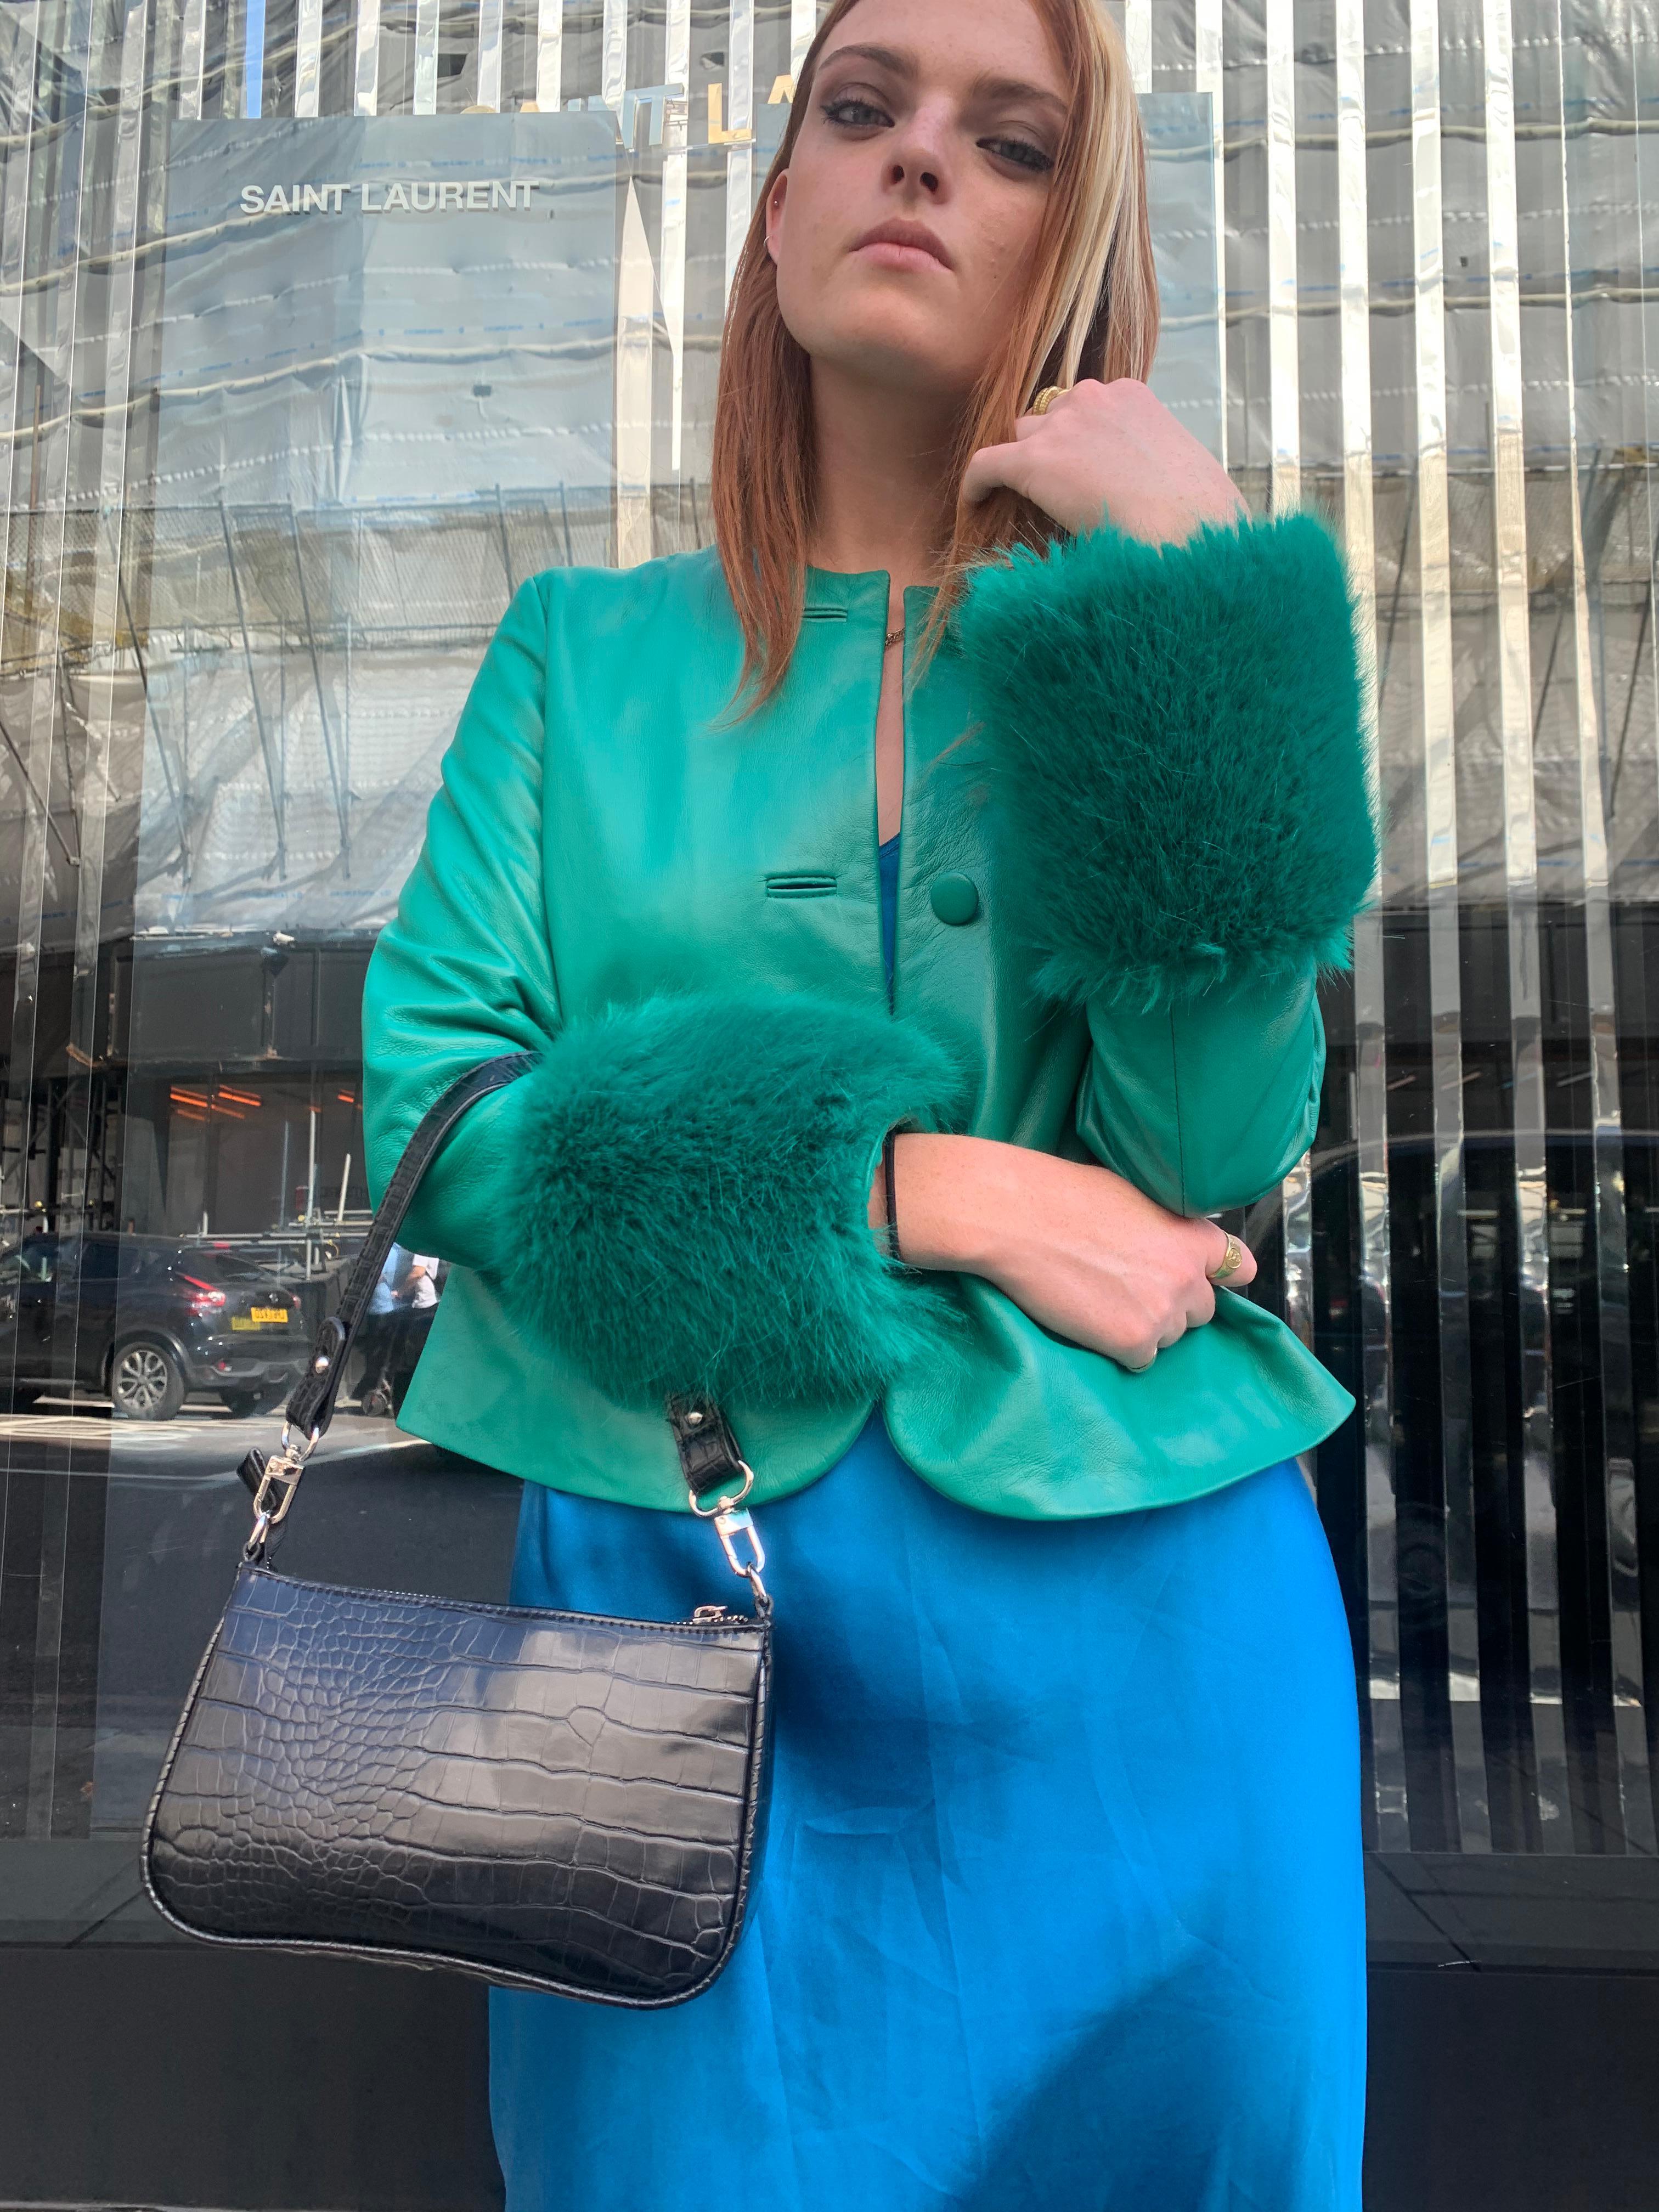 Verheyen Vita Cropped Jacket in Emerald Green Leather with Faux Fur - Size uk 8

Handmade in London, made with 100% Italian Lambs Leather and the highest quality of faux fur to match, this luxury item is an investment piece to wear for a lifetime. 